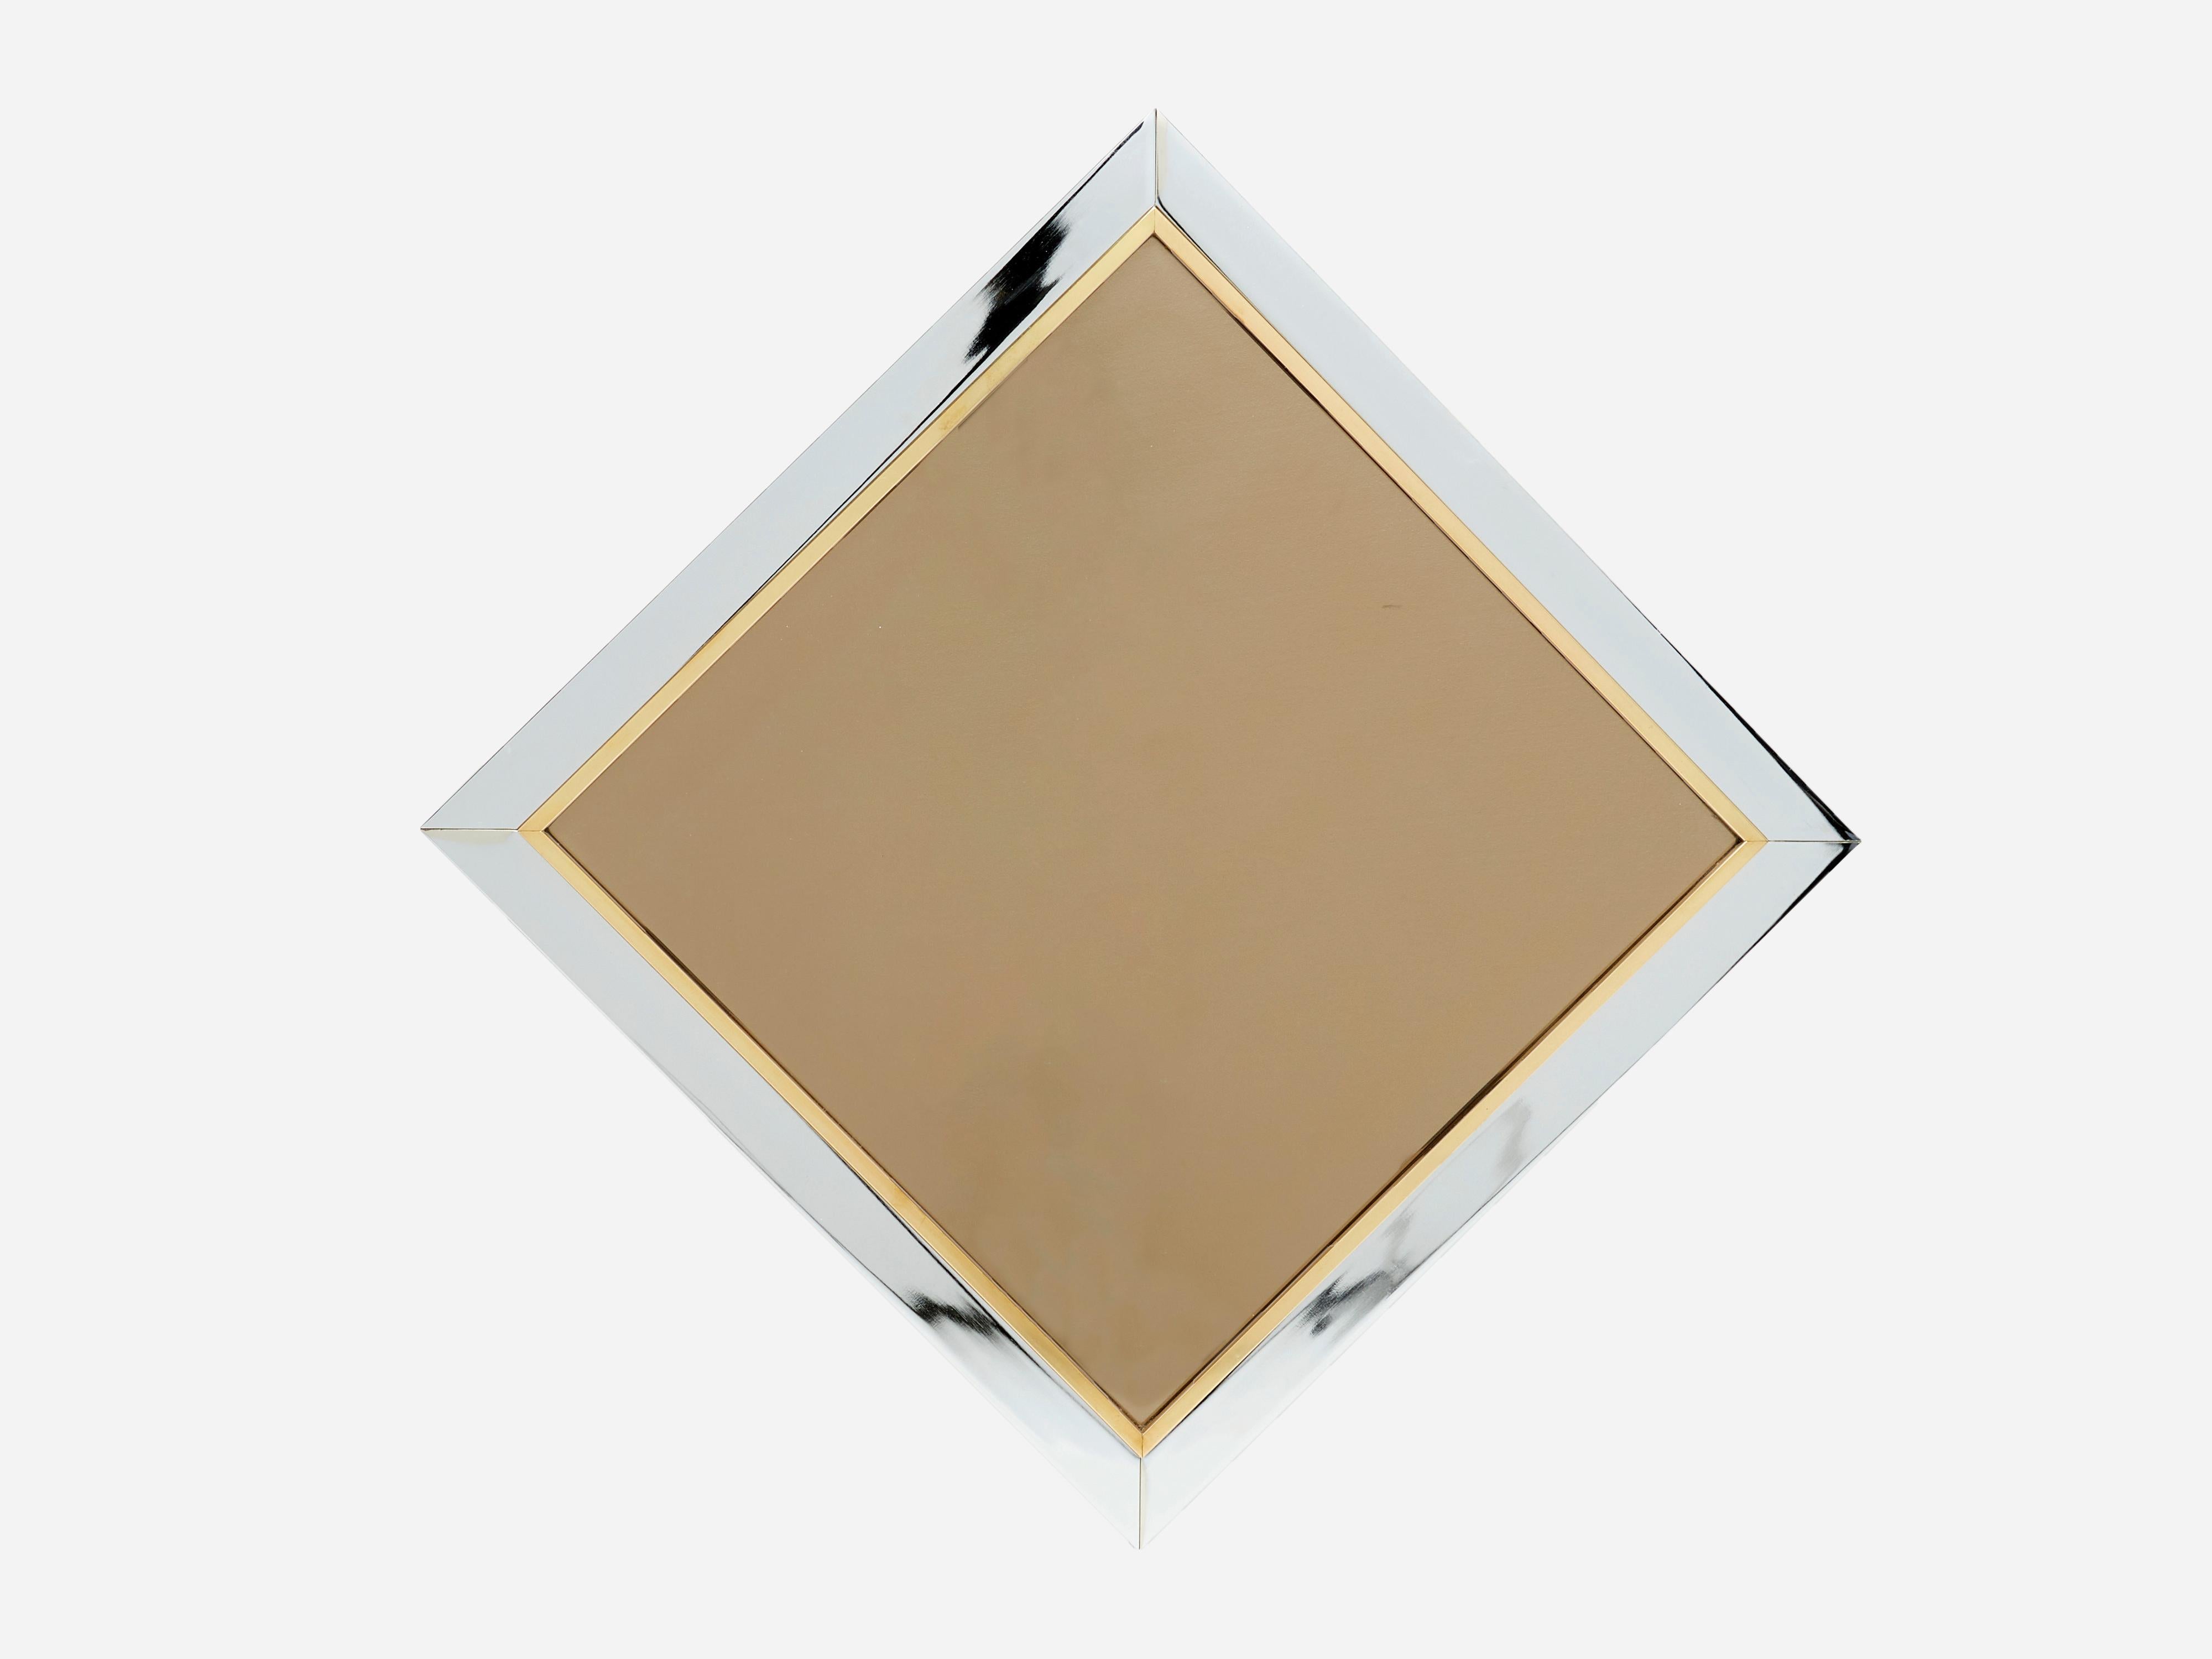 Belgian Chrome and Brass Mirror by Belgo Chrome, 1970s For Sale